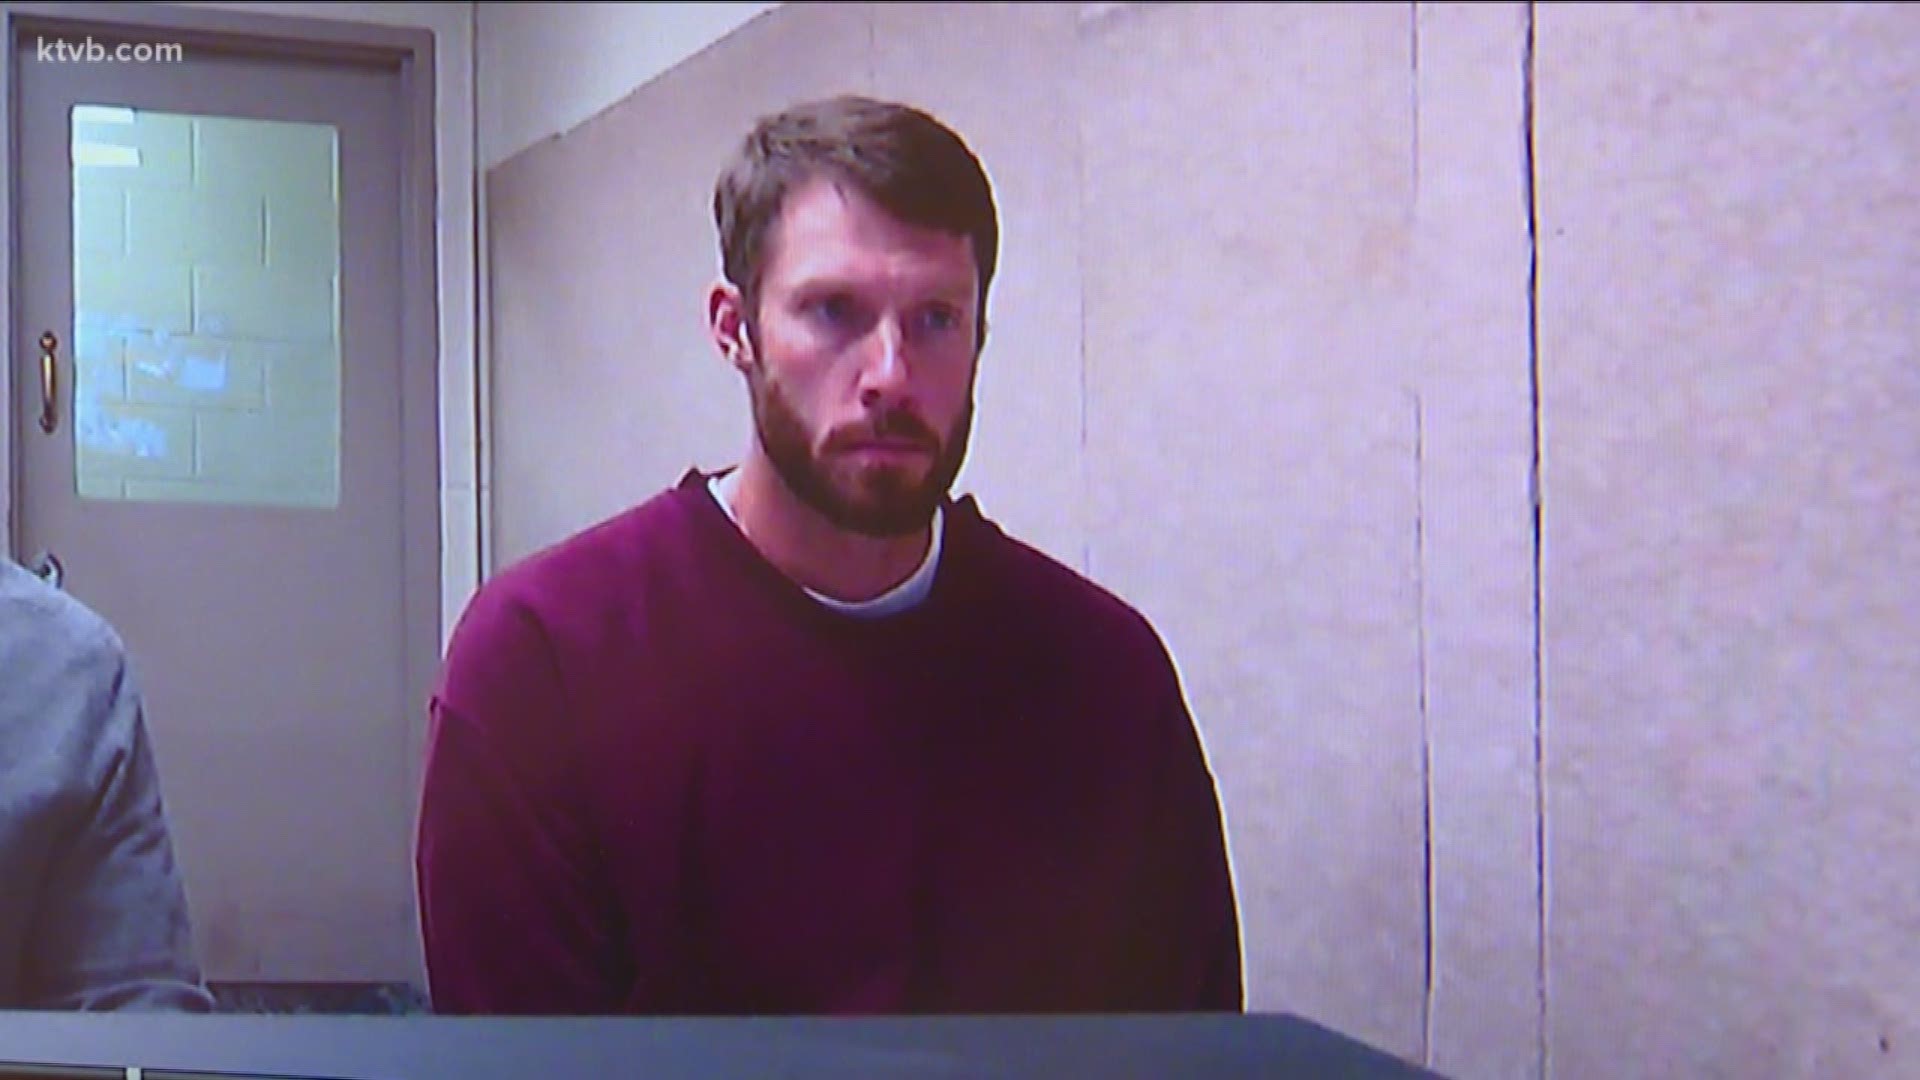 The former basketball coach and teacher at Eagle High School admitted to having a sexual relationship with a 17-year-old girl Tuesday morning as part of a plea deal.